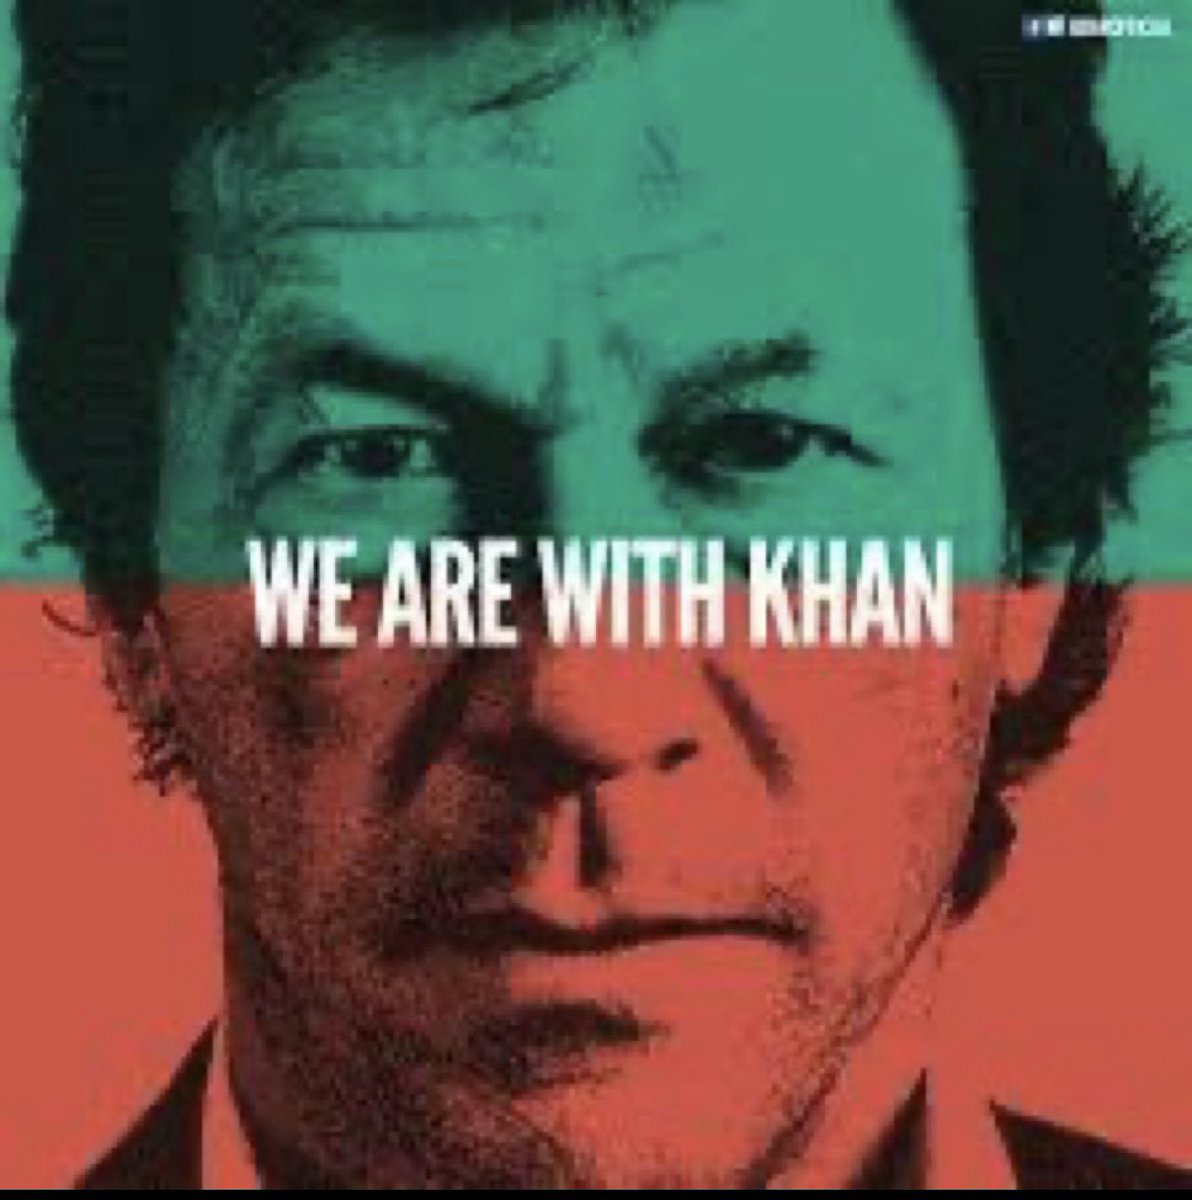 To the end, #IamwithKhan